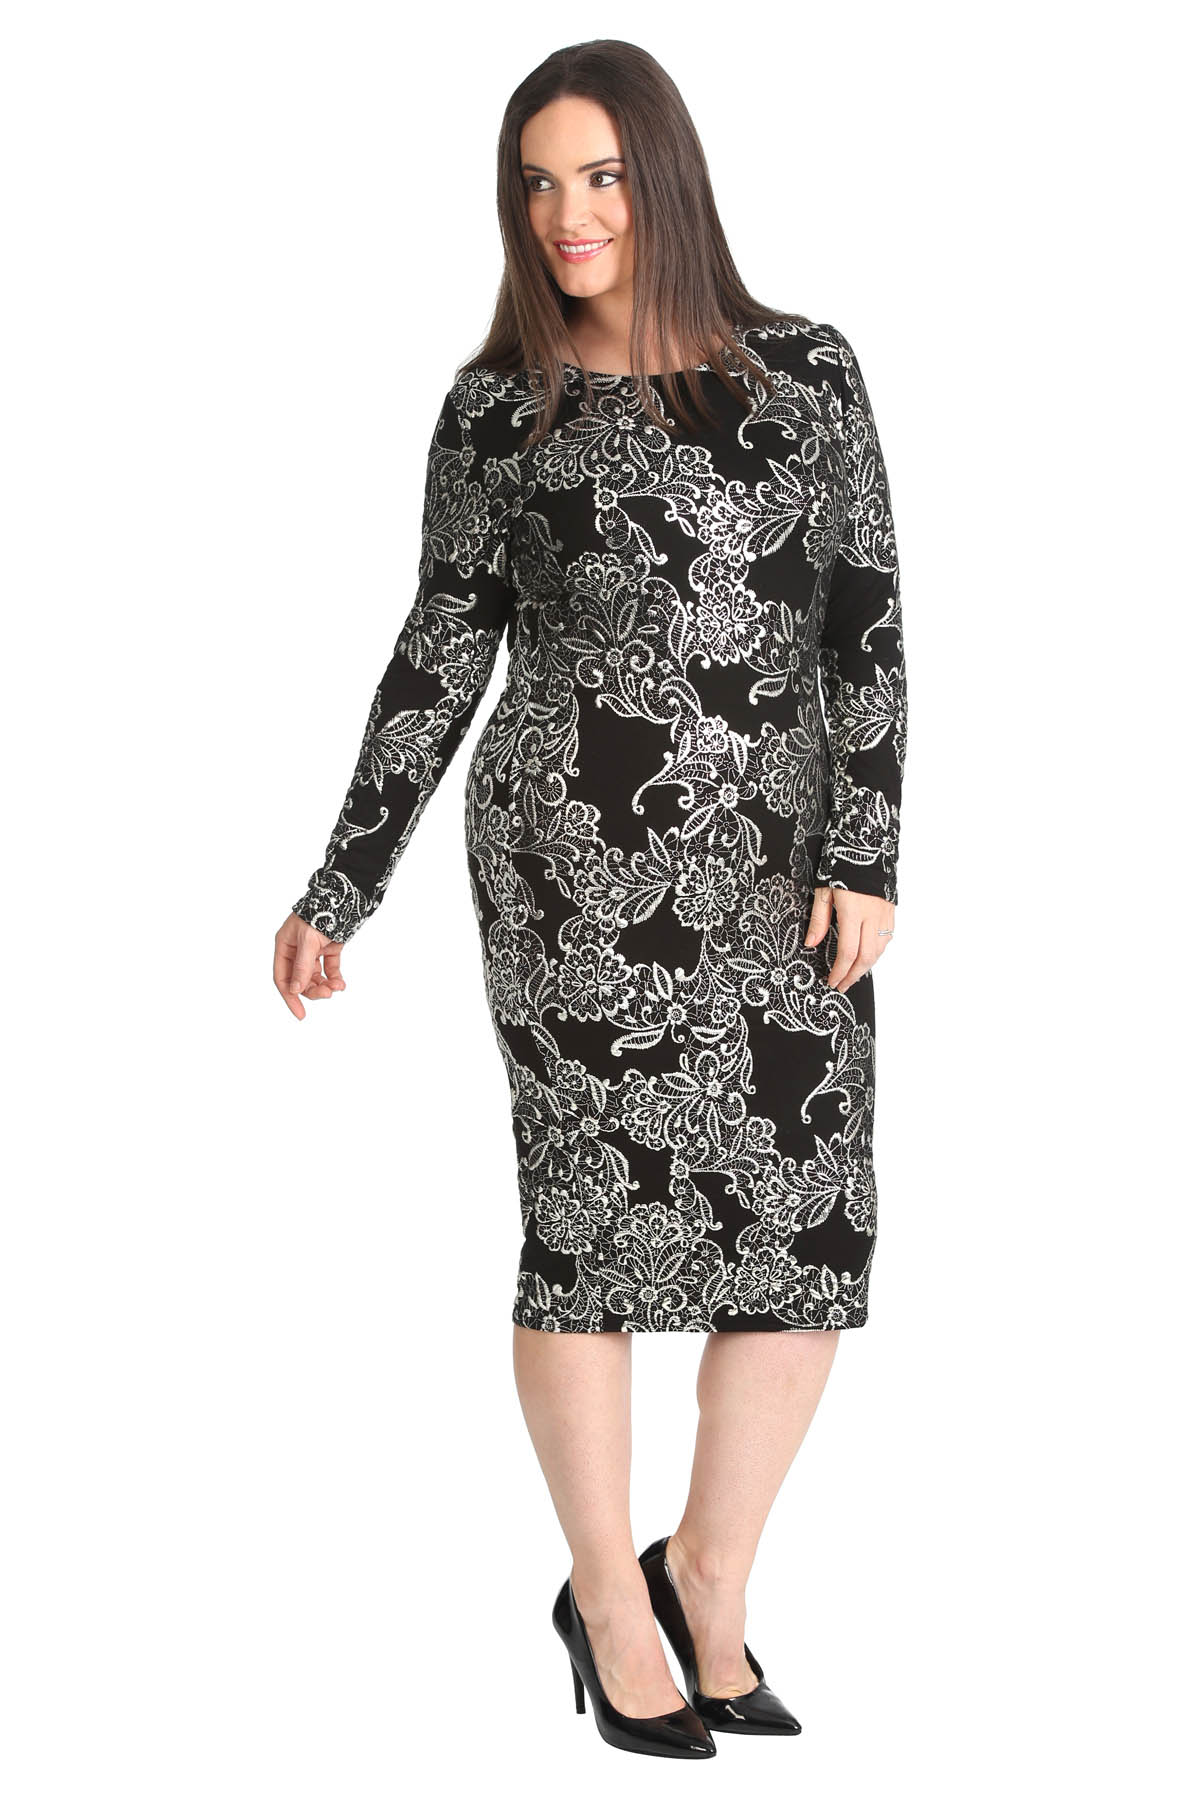 New Ladies Plus Size Dress Midi Party Bodycon Floral Embroidery Womens ...